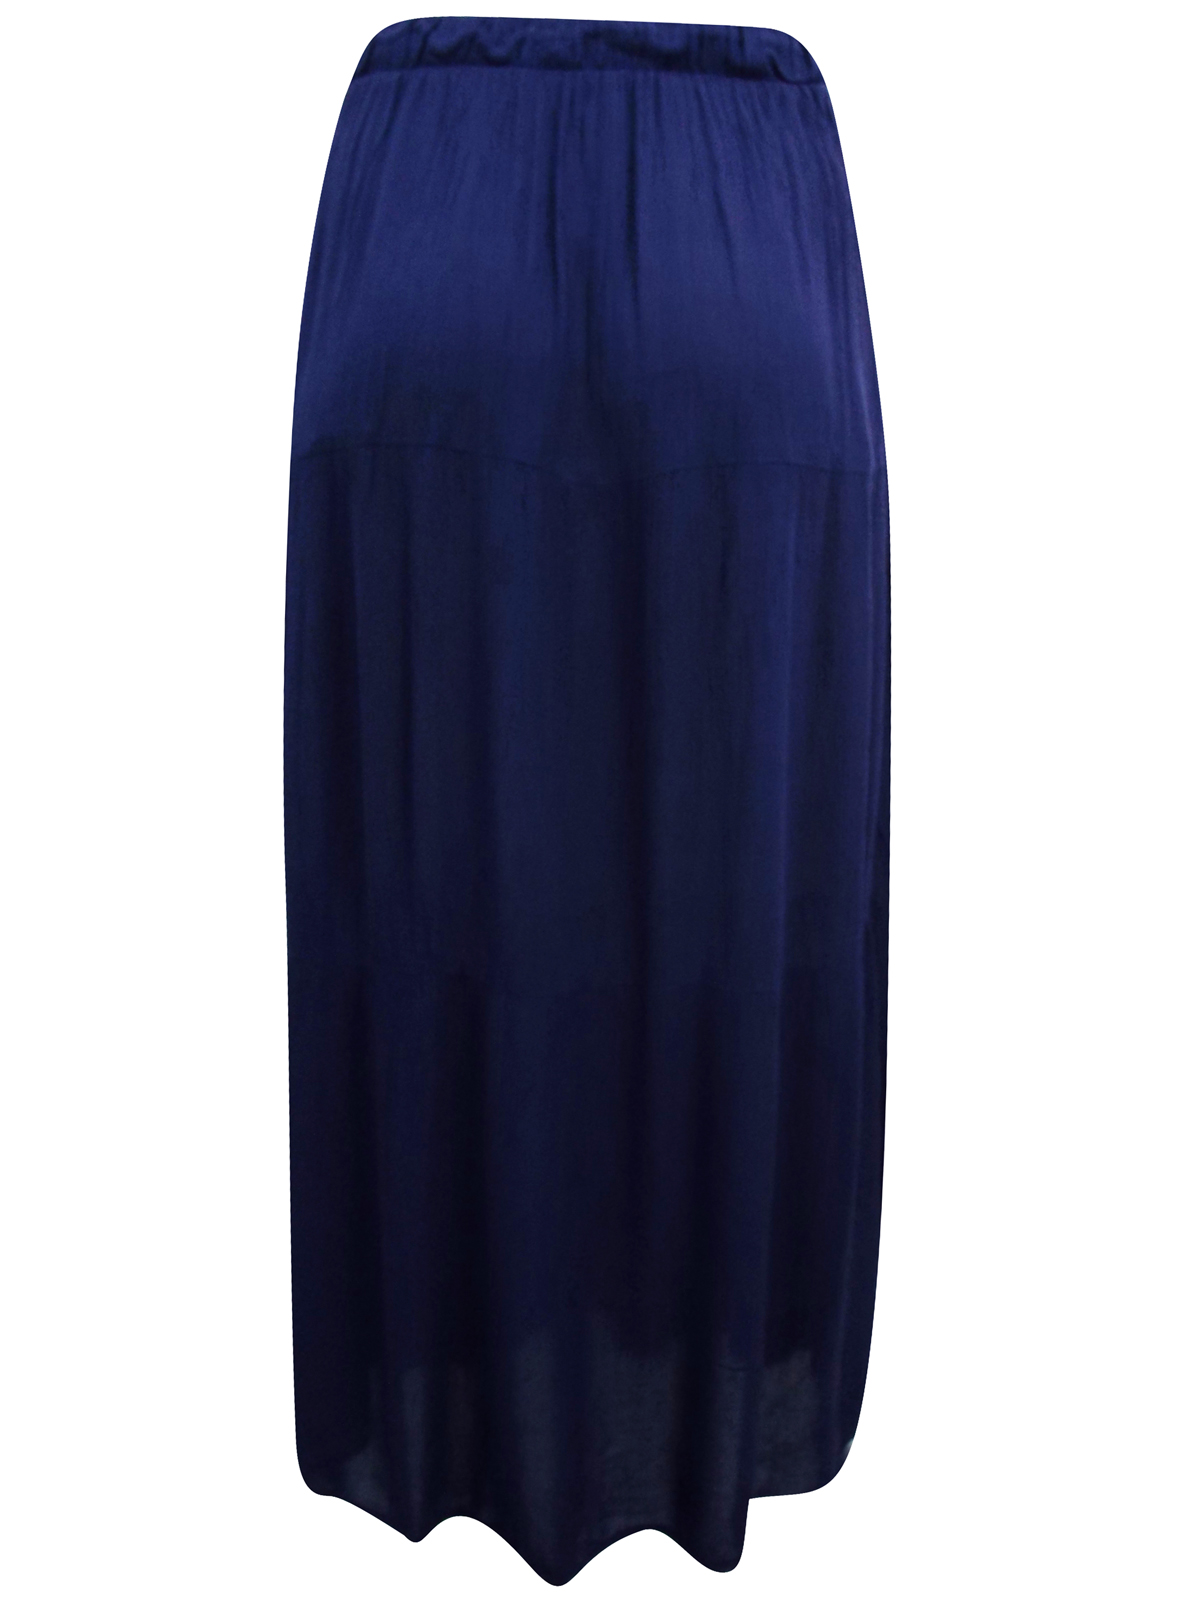 NAVY Tie Front Crinkle Maxi Skirt - Size 8 to 24